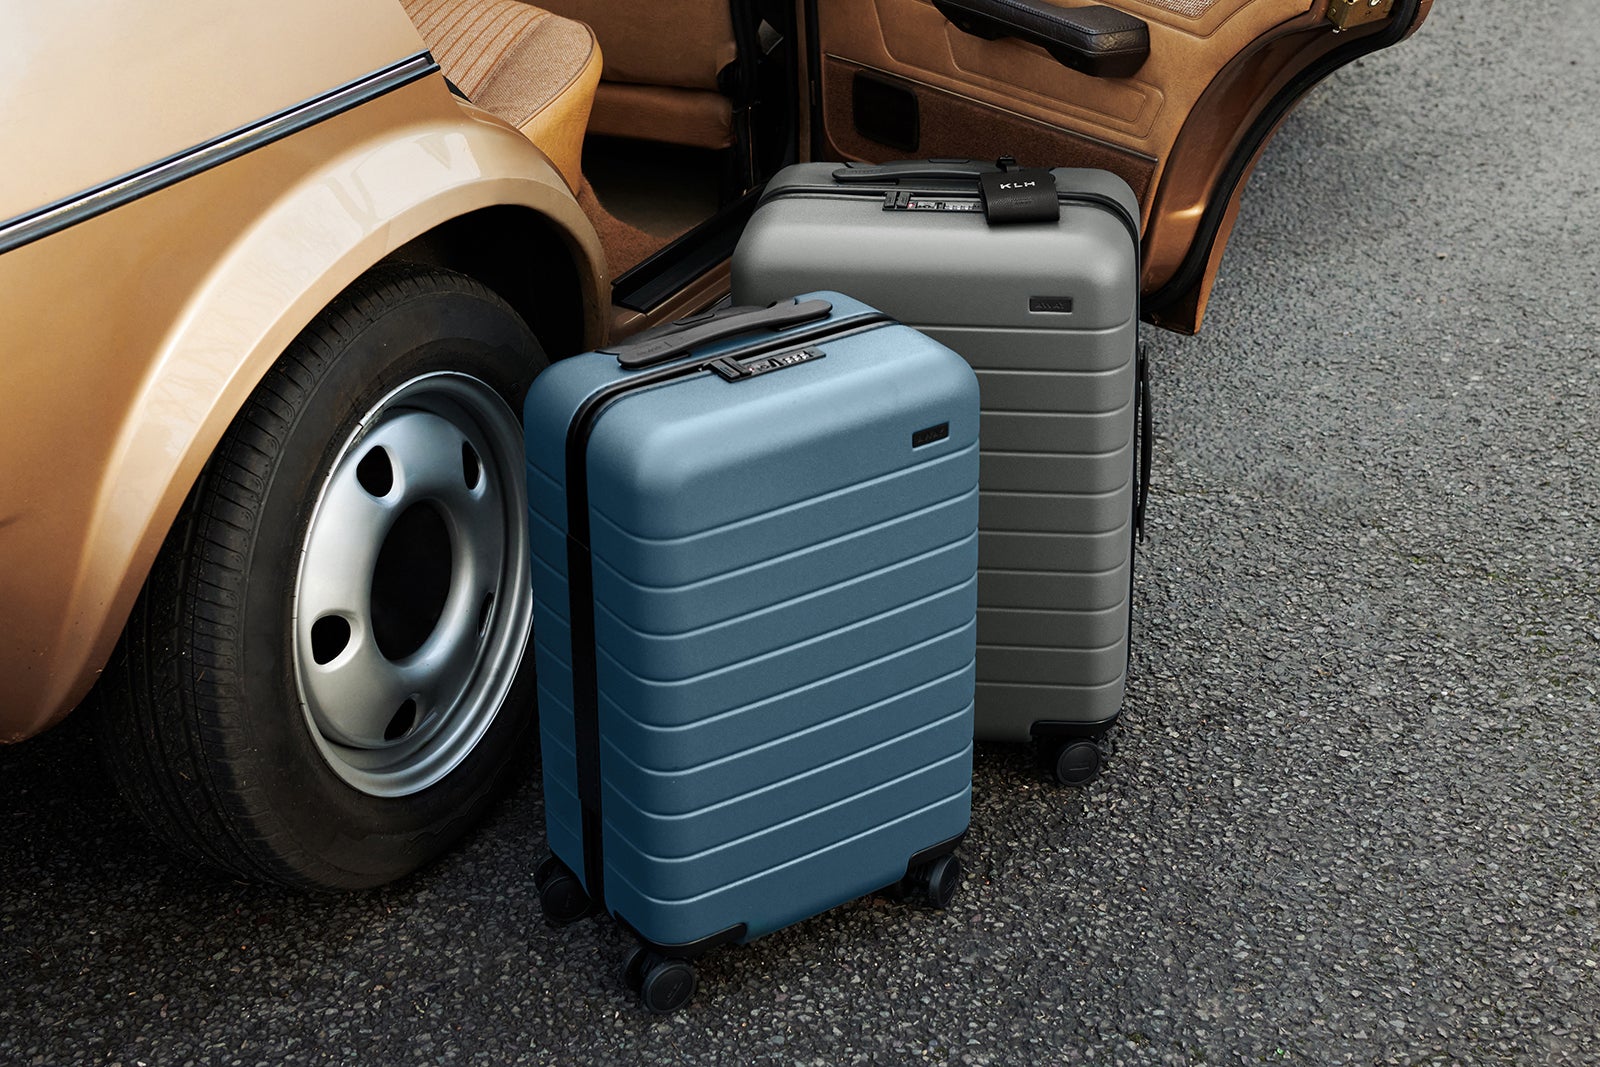 best carry on luggage business travel